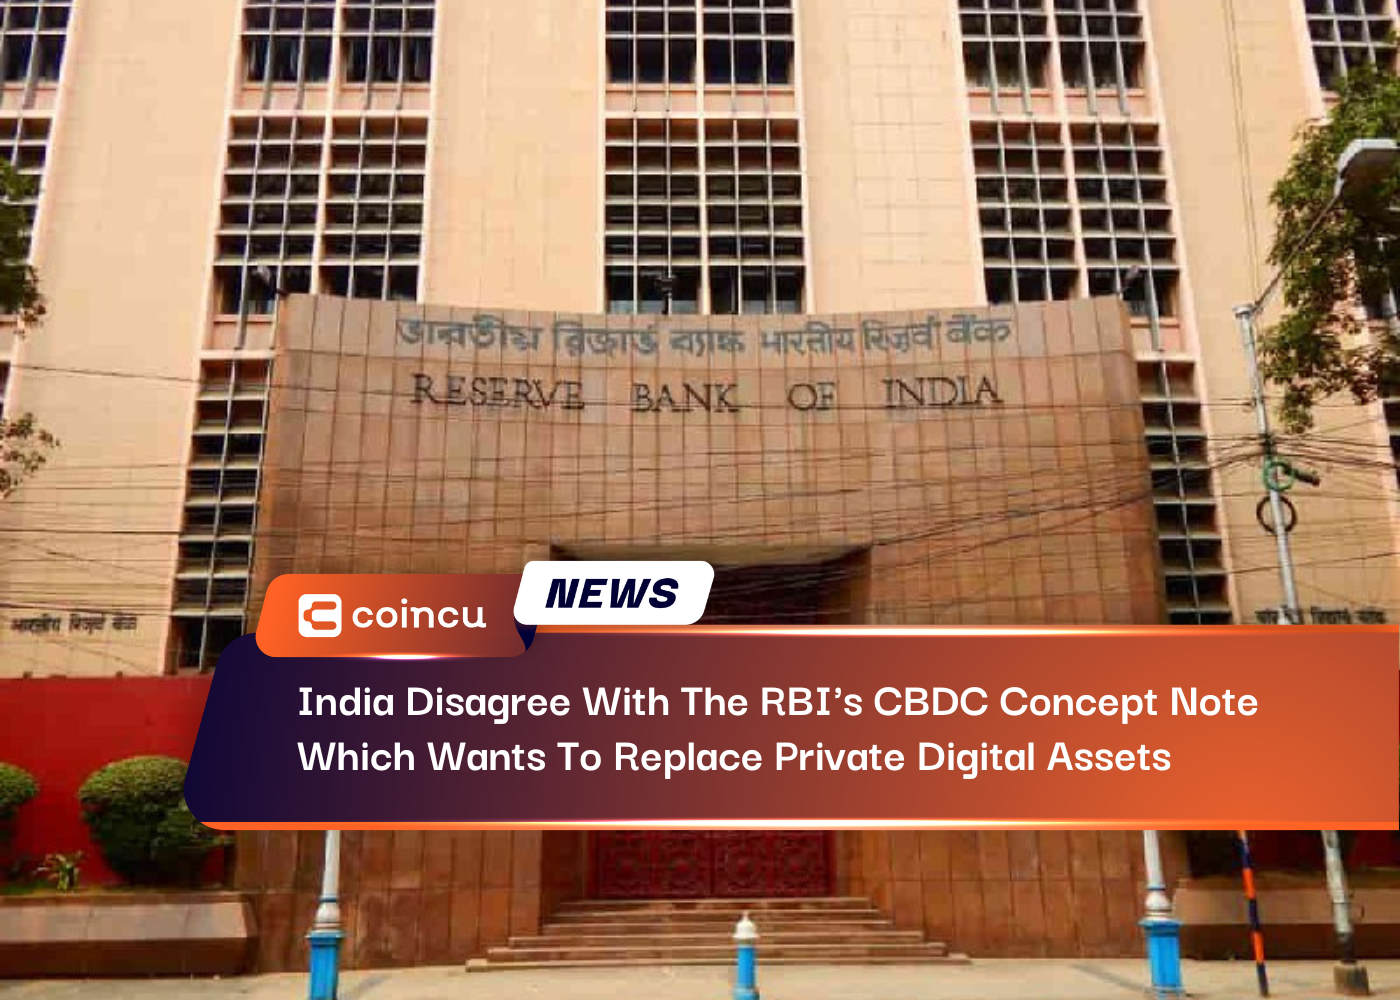 India Disagree With The RBIs CBDC Concept Note